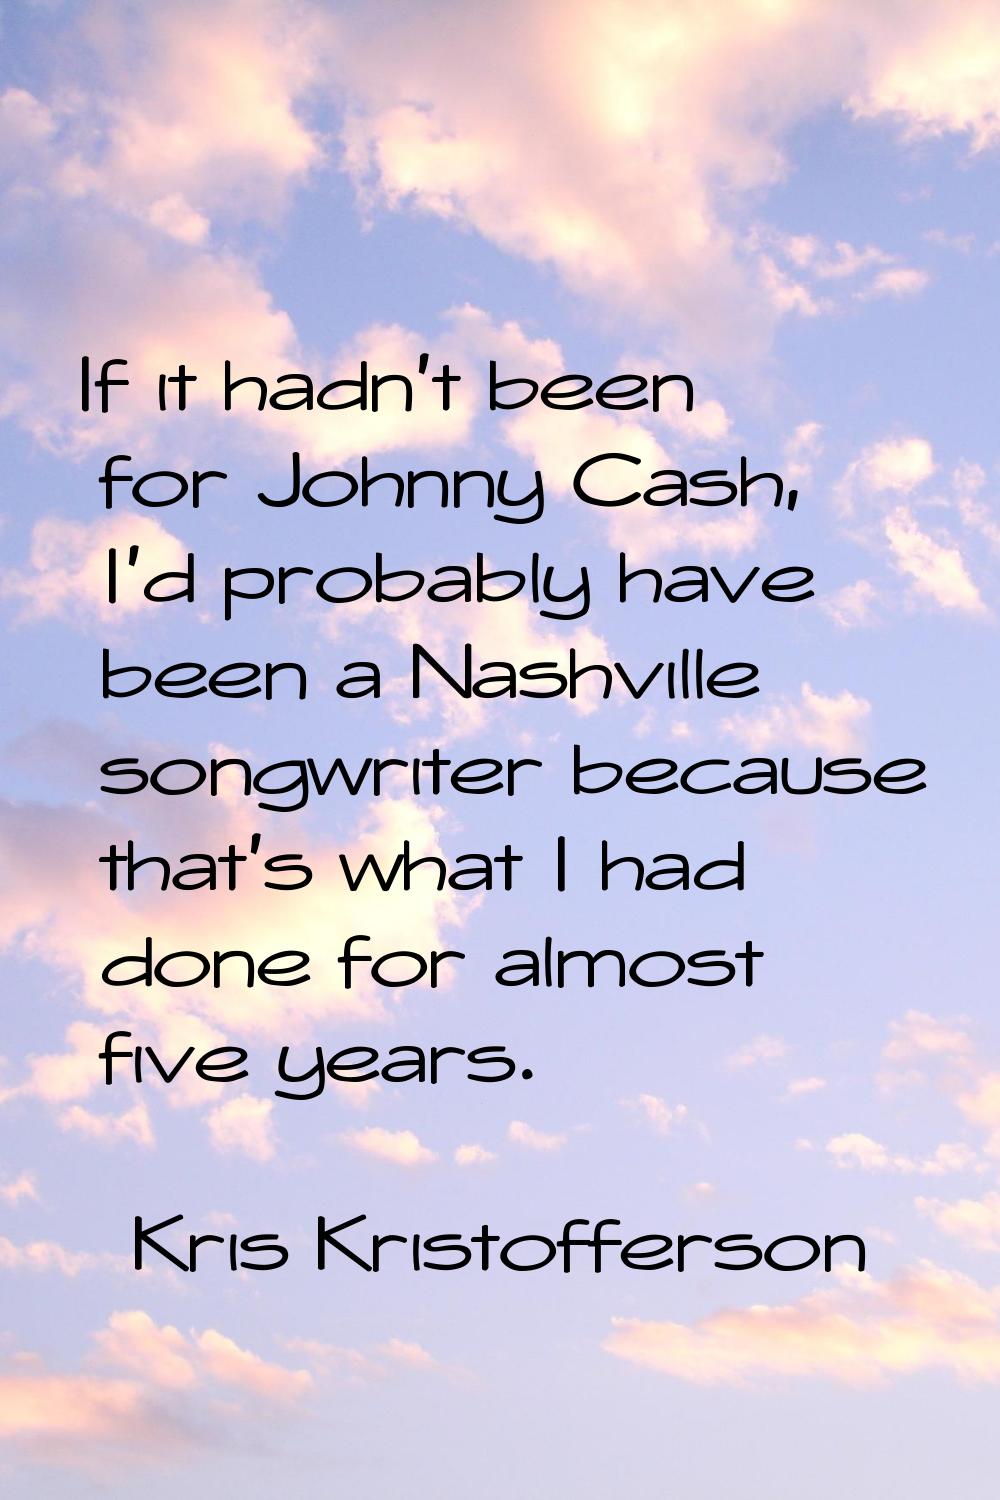 If it hadn't been for Johnny Cash, I'd probably have been a Nashville songwriter because that's wha